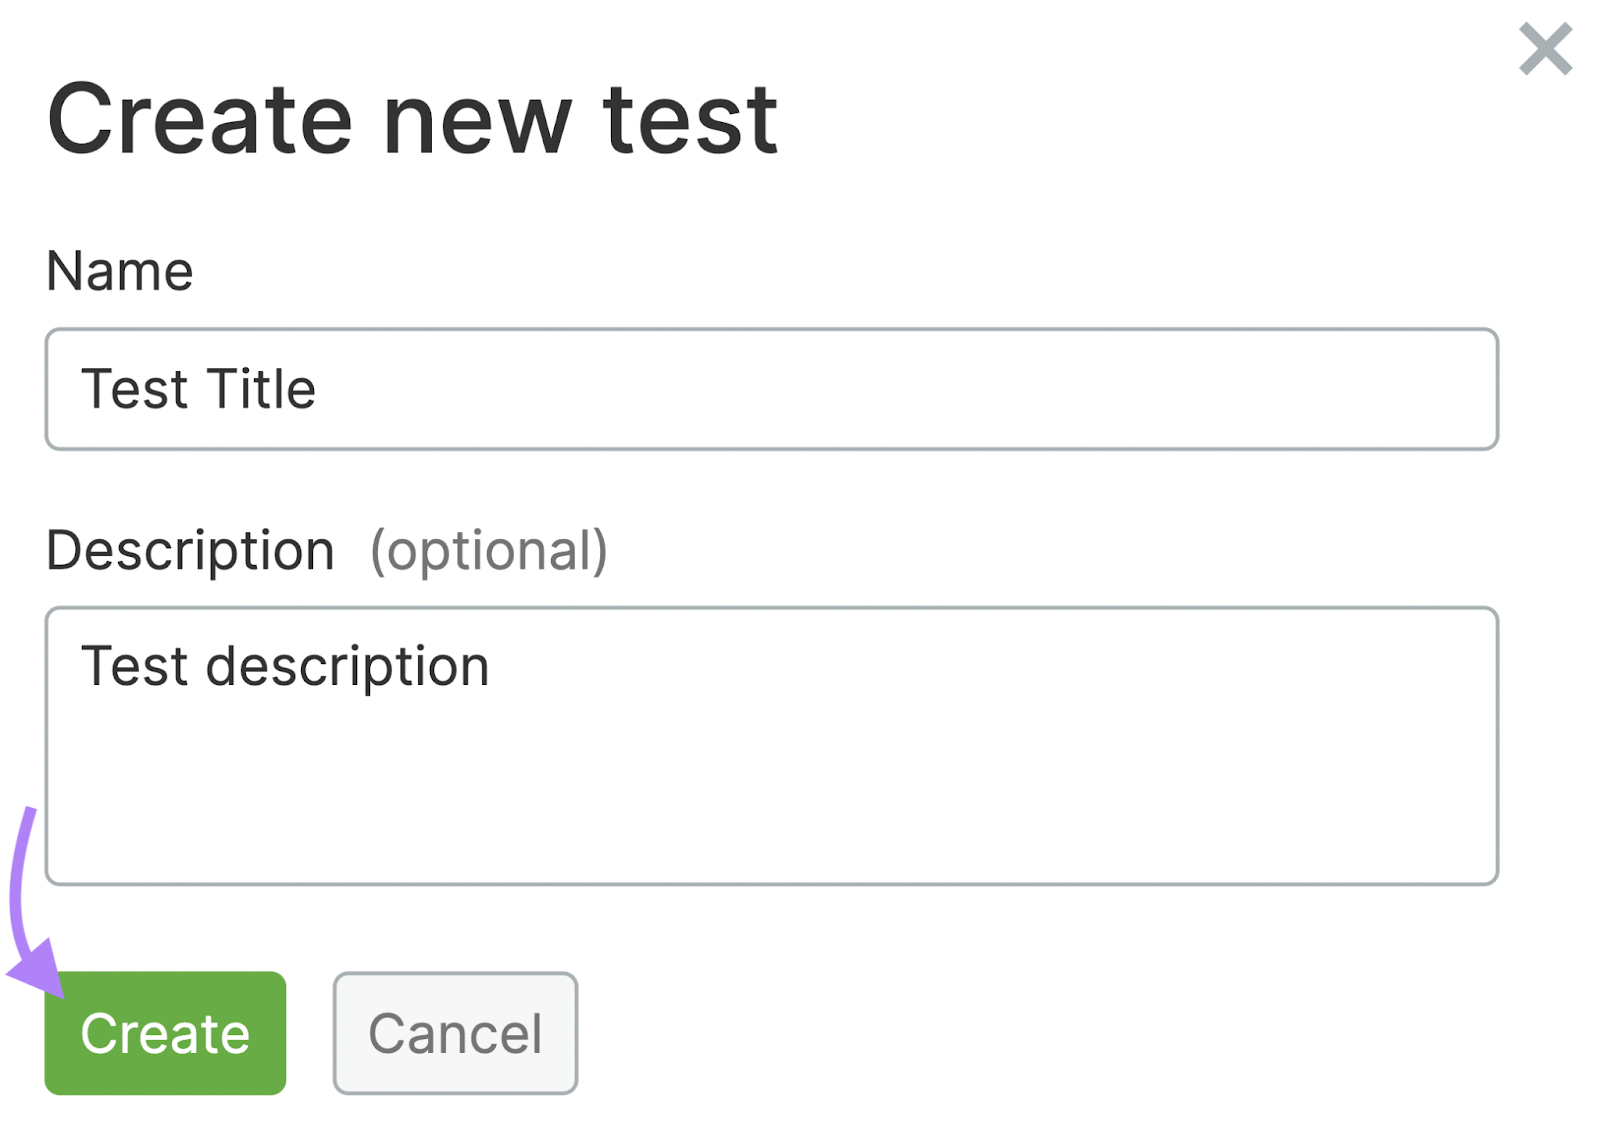 “Create new test” page